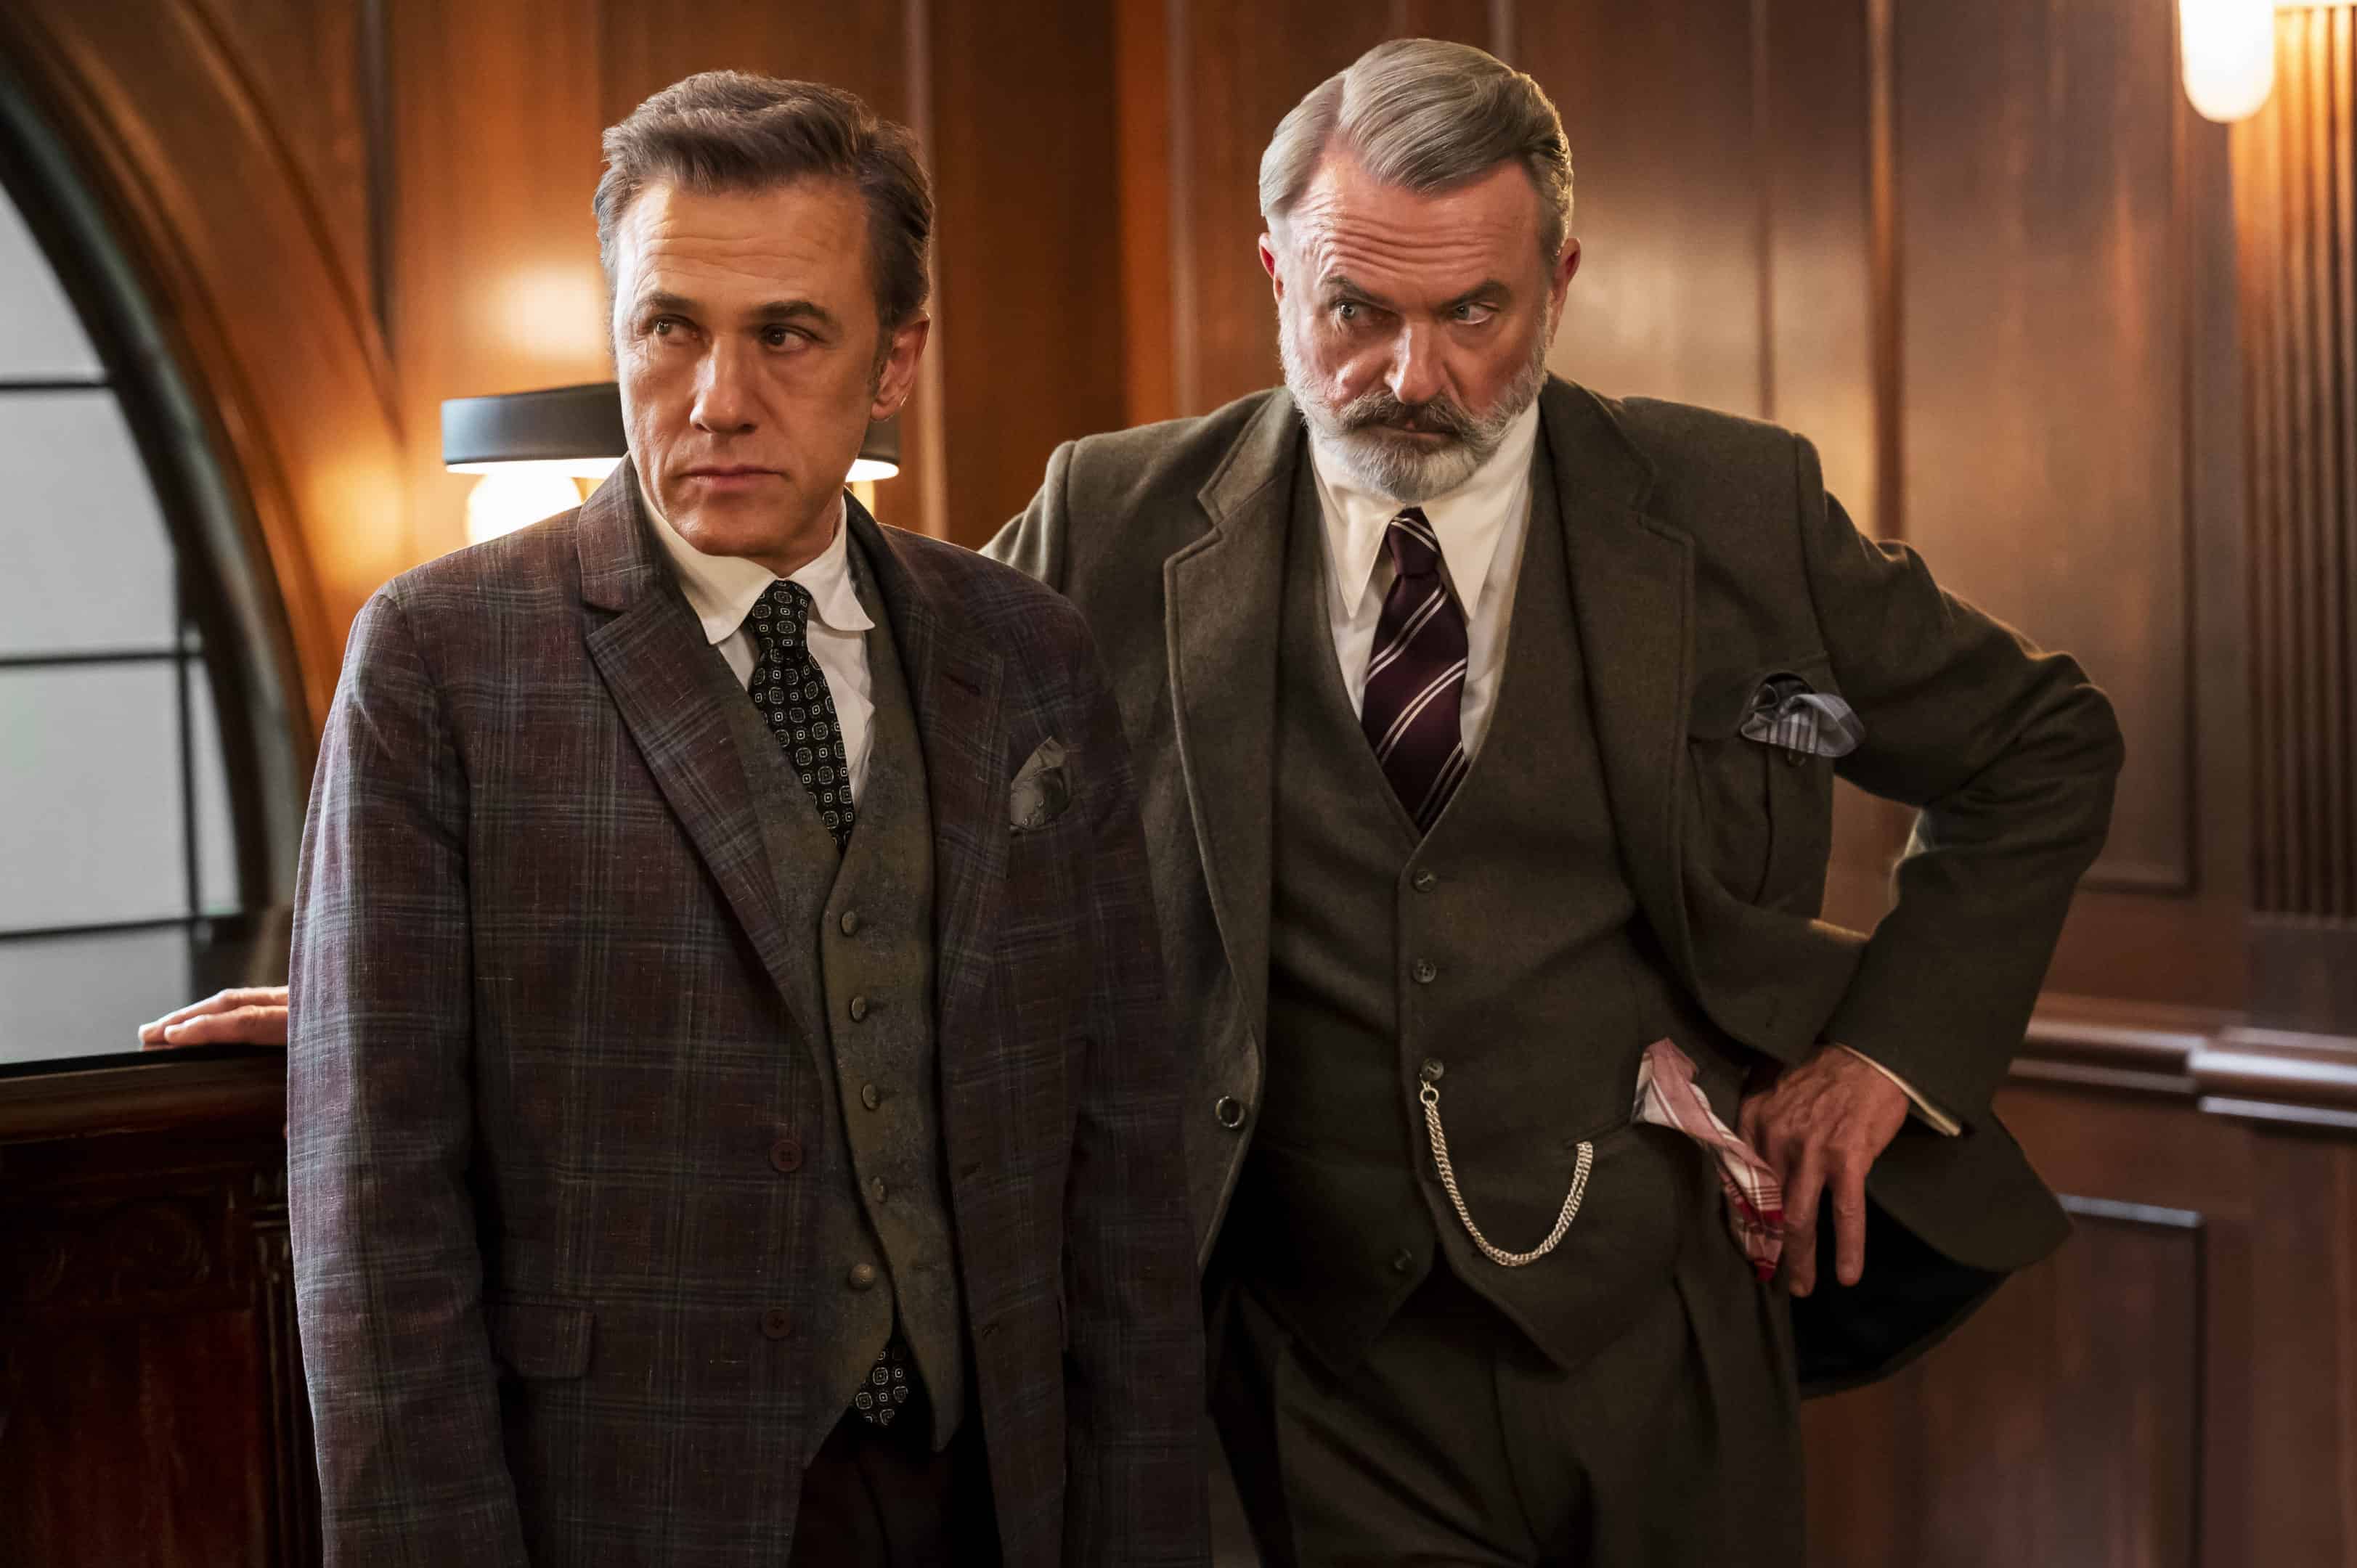 The Portable Door: MGM+ Original Comedy Starring Christoph Waltz and Sam Neill to Debut in the US on April 8th, 2023 18